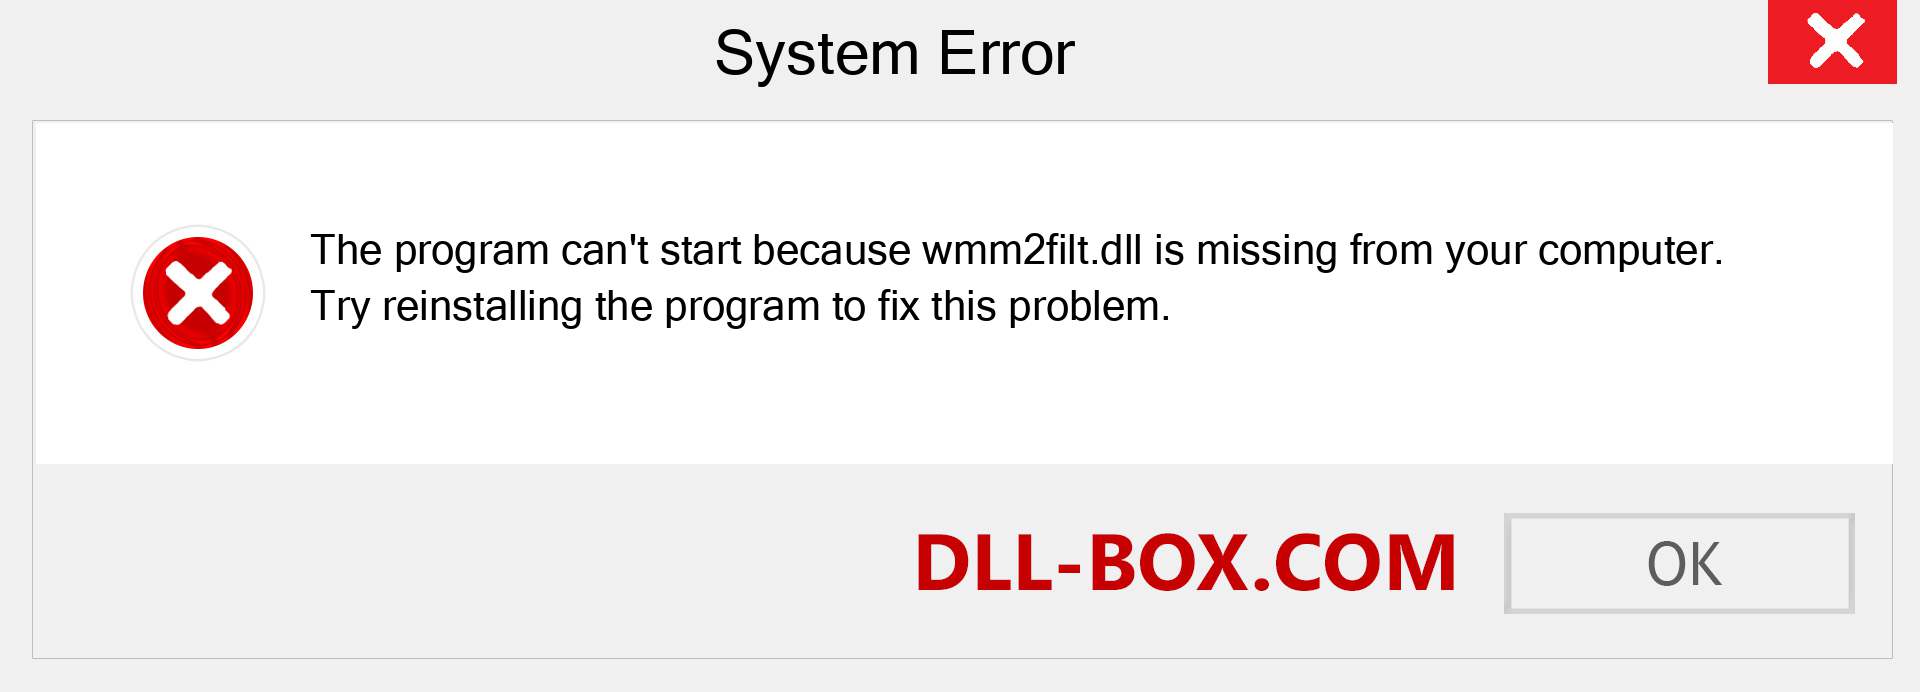  wmm2filt.dll file is missing?. Download for Windows 7, 8, 10 - Fix  wmm2filt dll Missing Error on Windows, photos, images